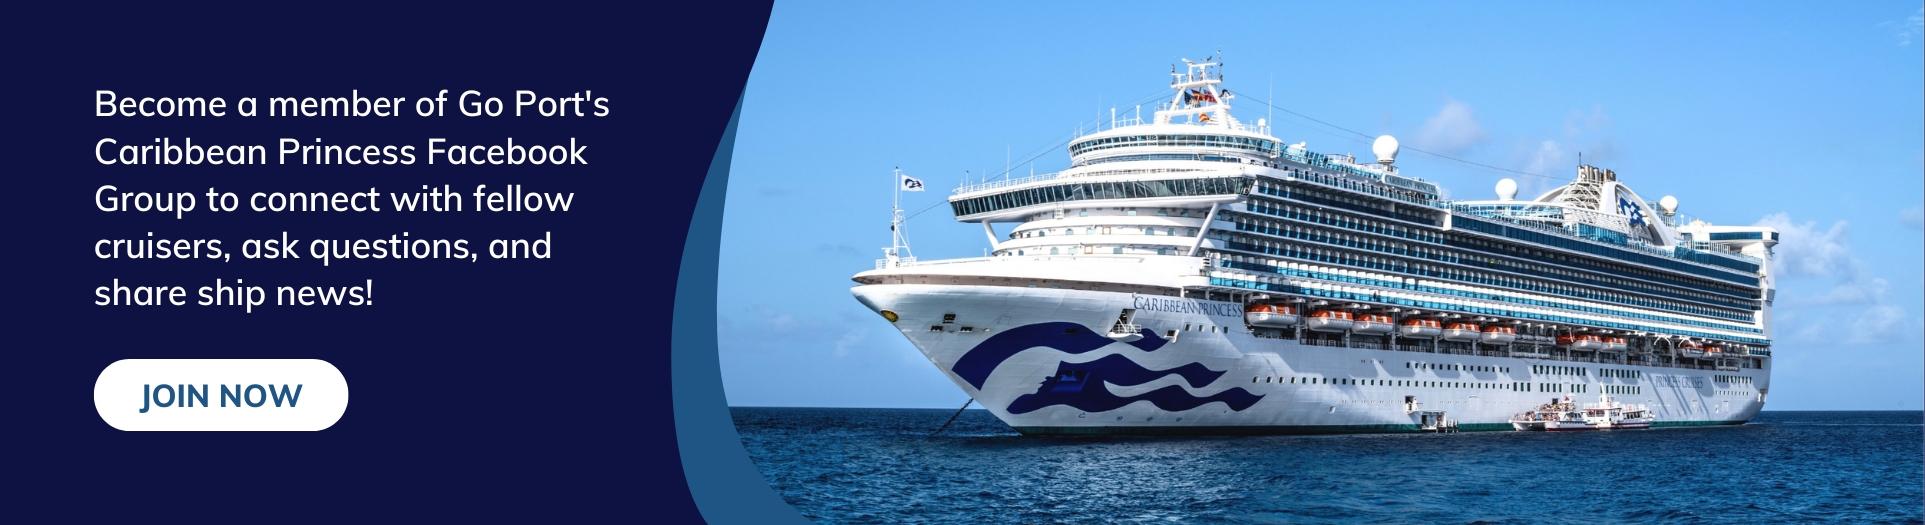 Become a member of Go Port's Caribbean Princess Facebook Group to connect with fellow cruisers, ask questions, and share ship news! "Join Now" button